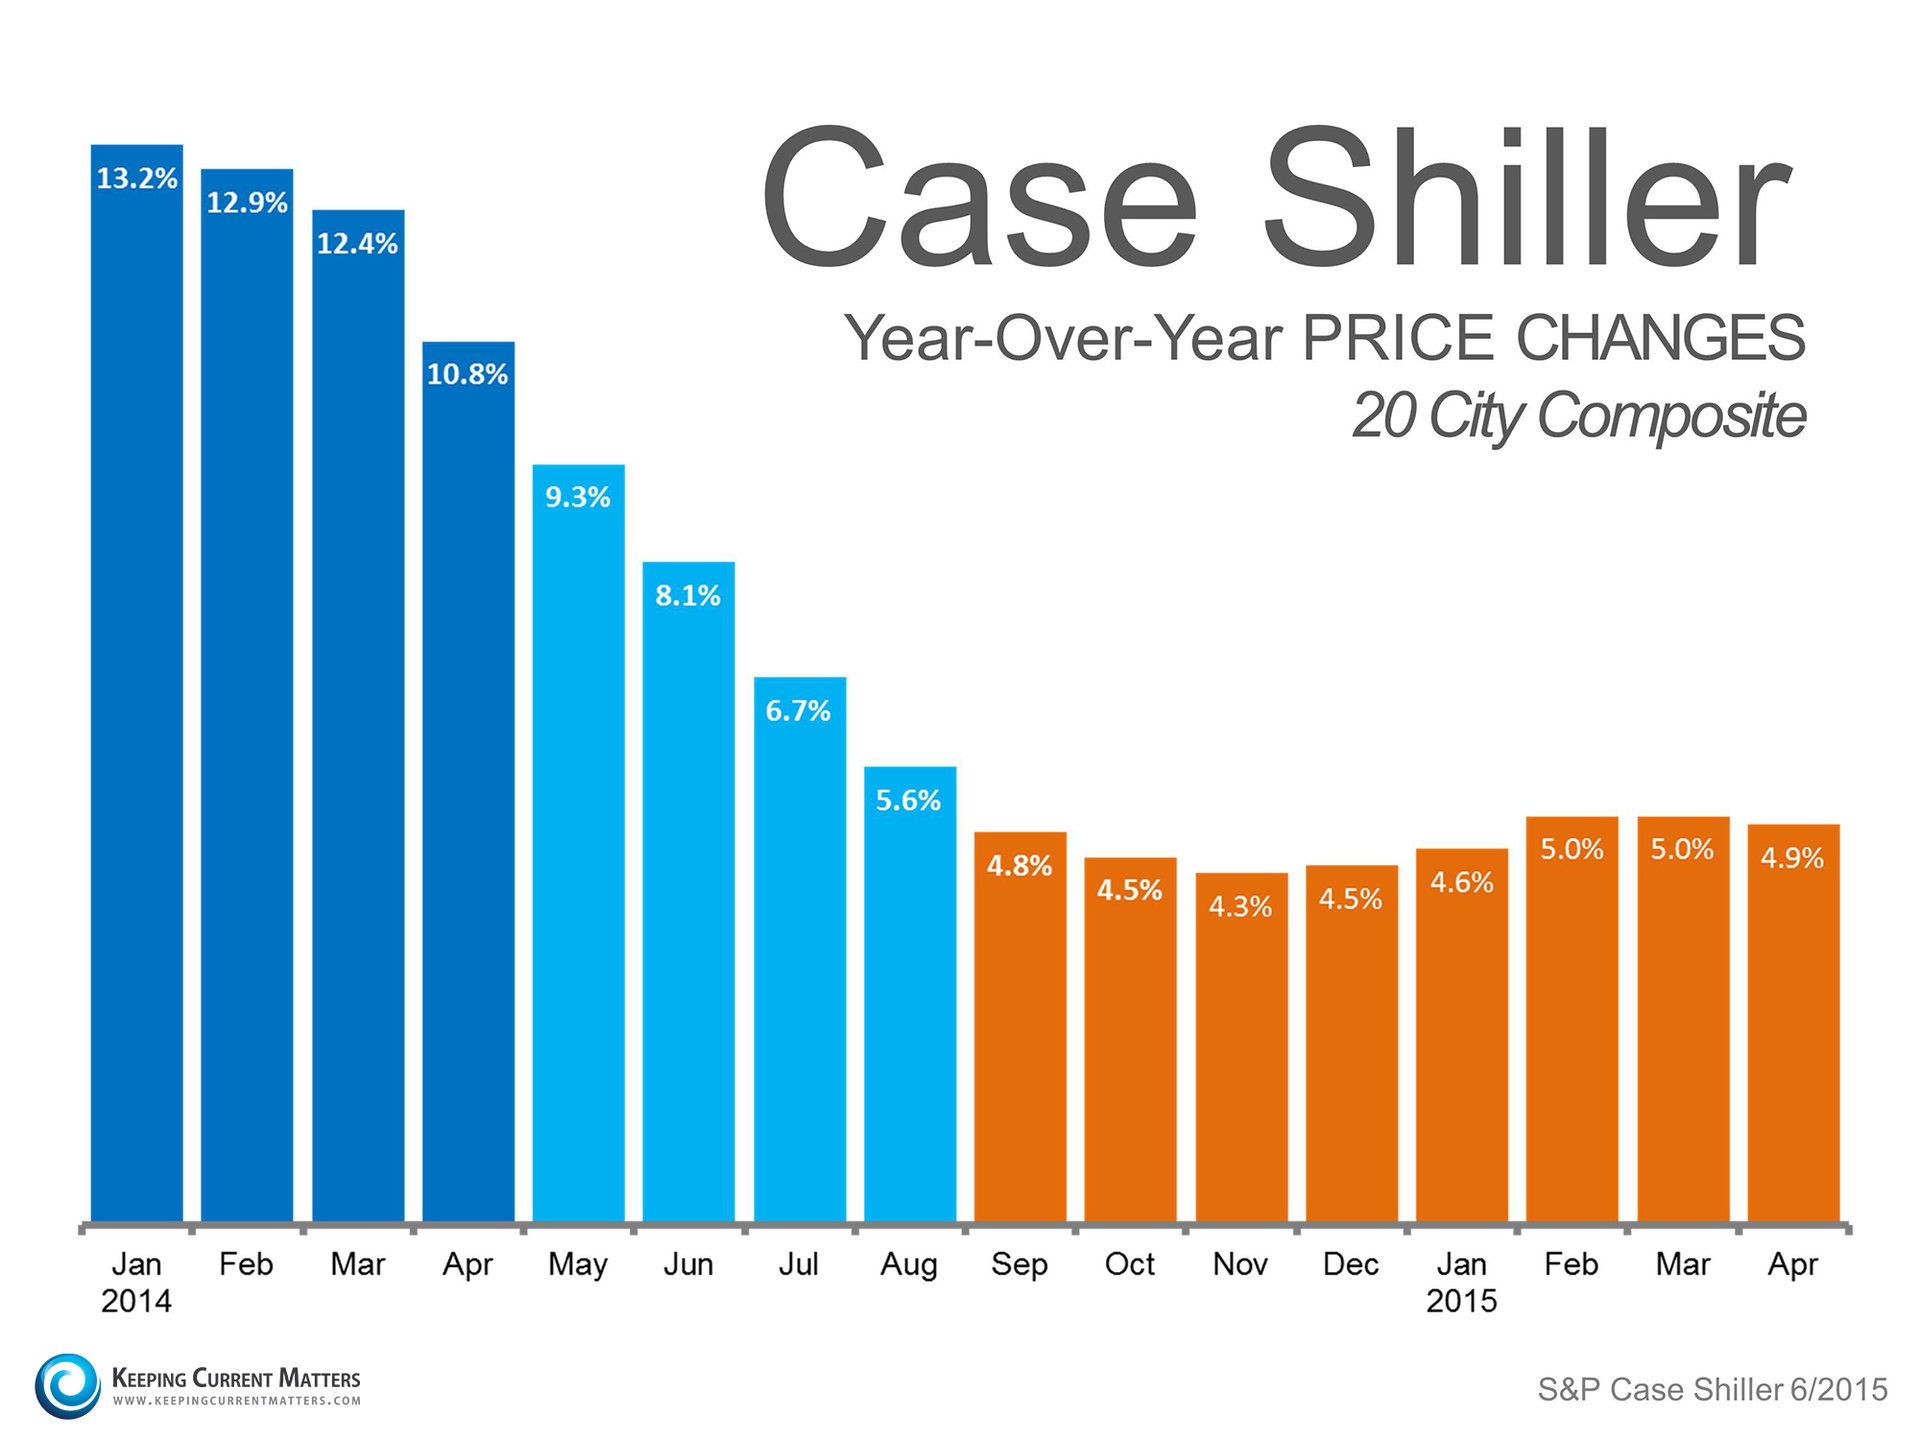 Case Shiller Price Changes | Keeping Current Matters